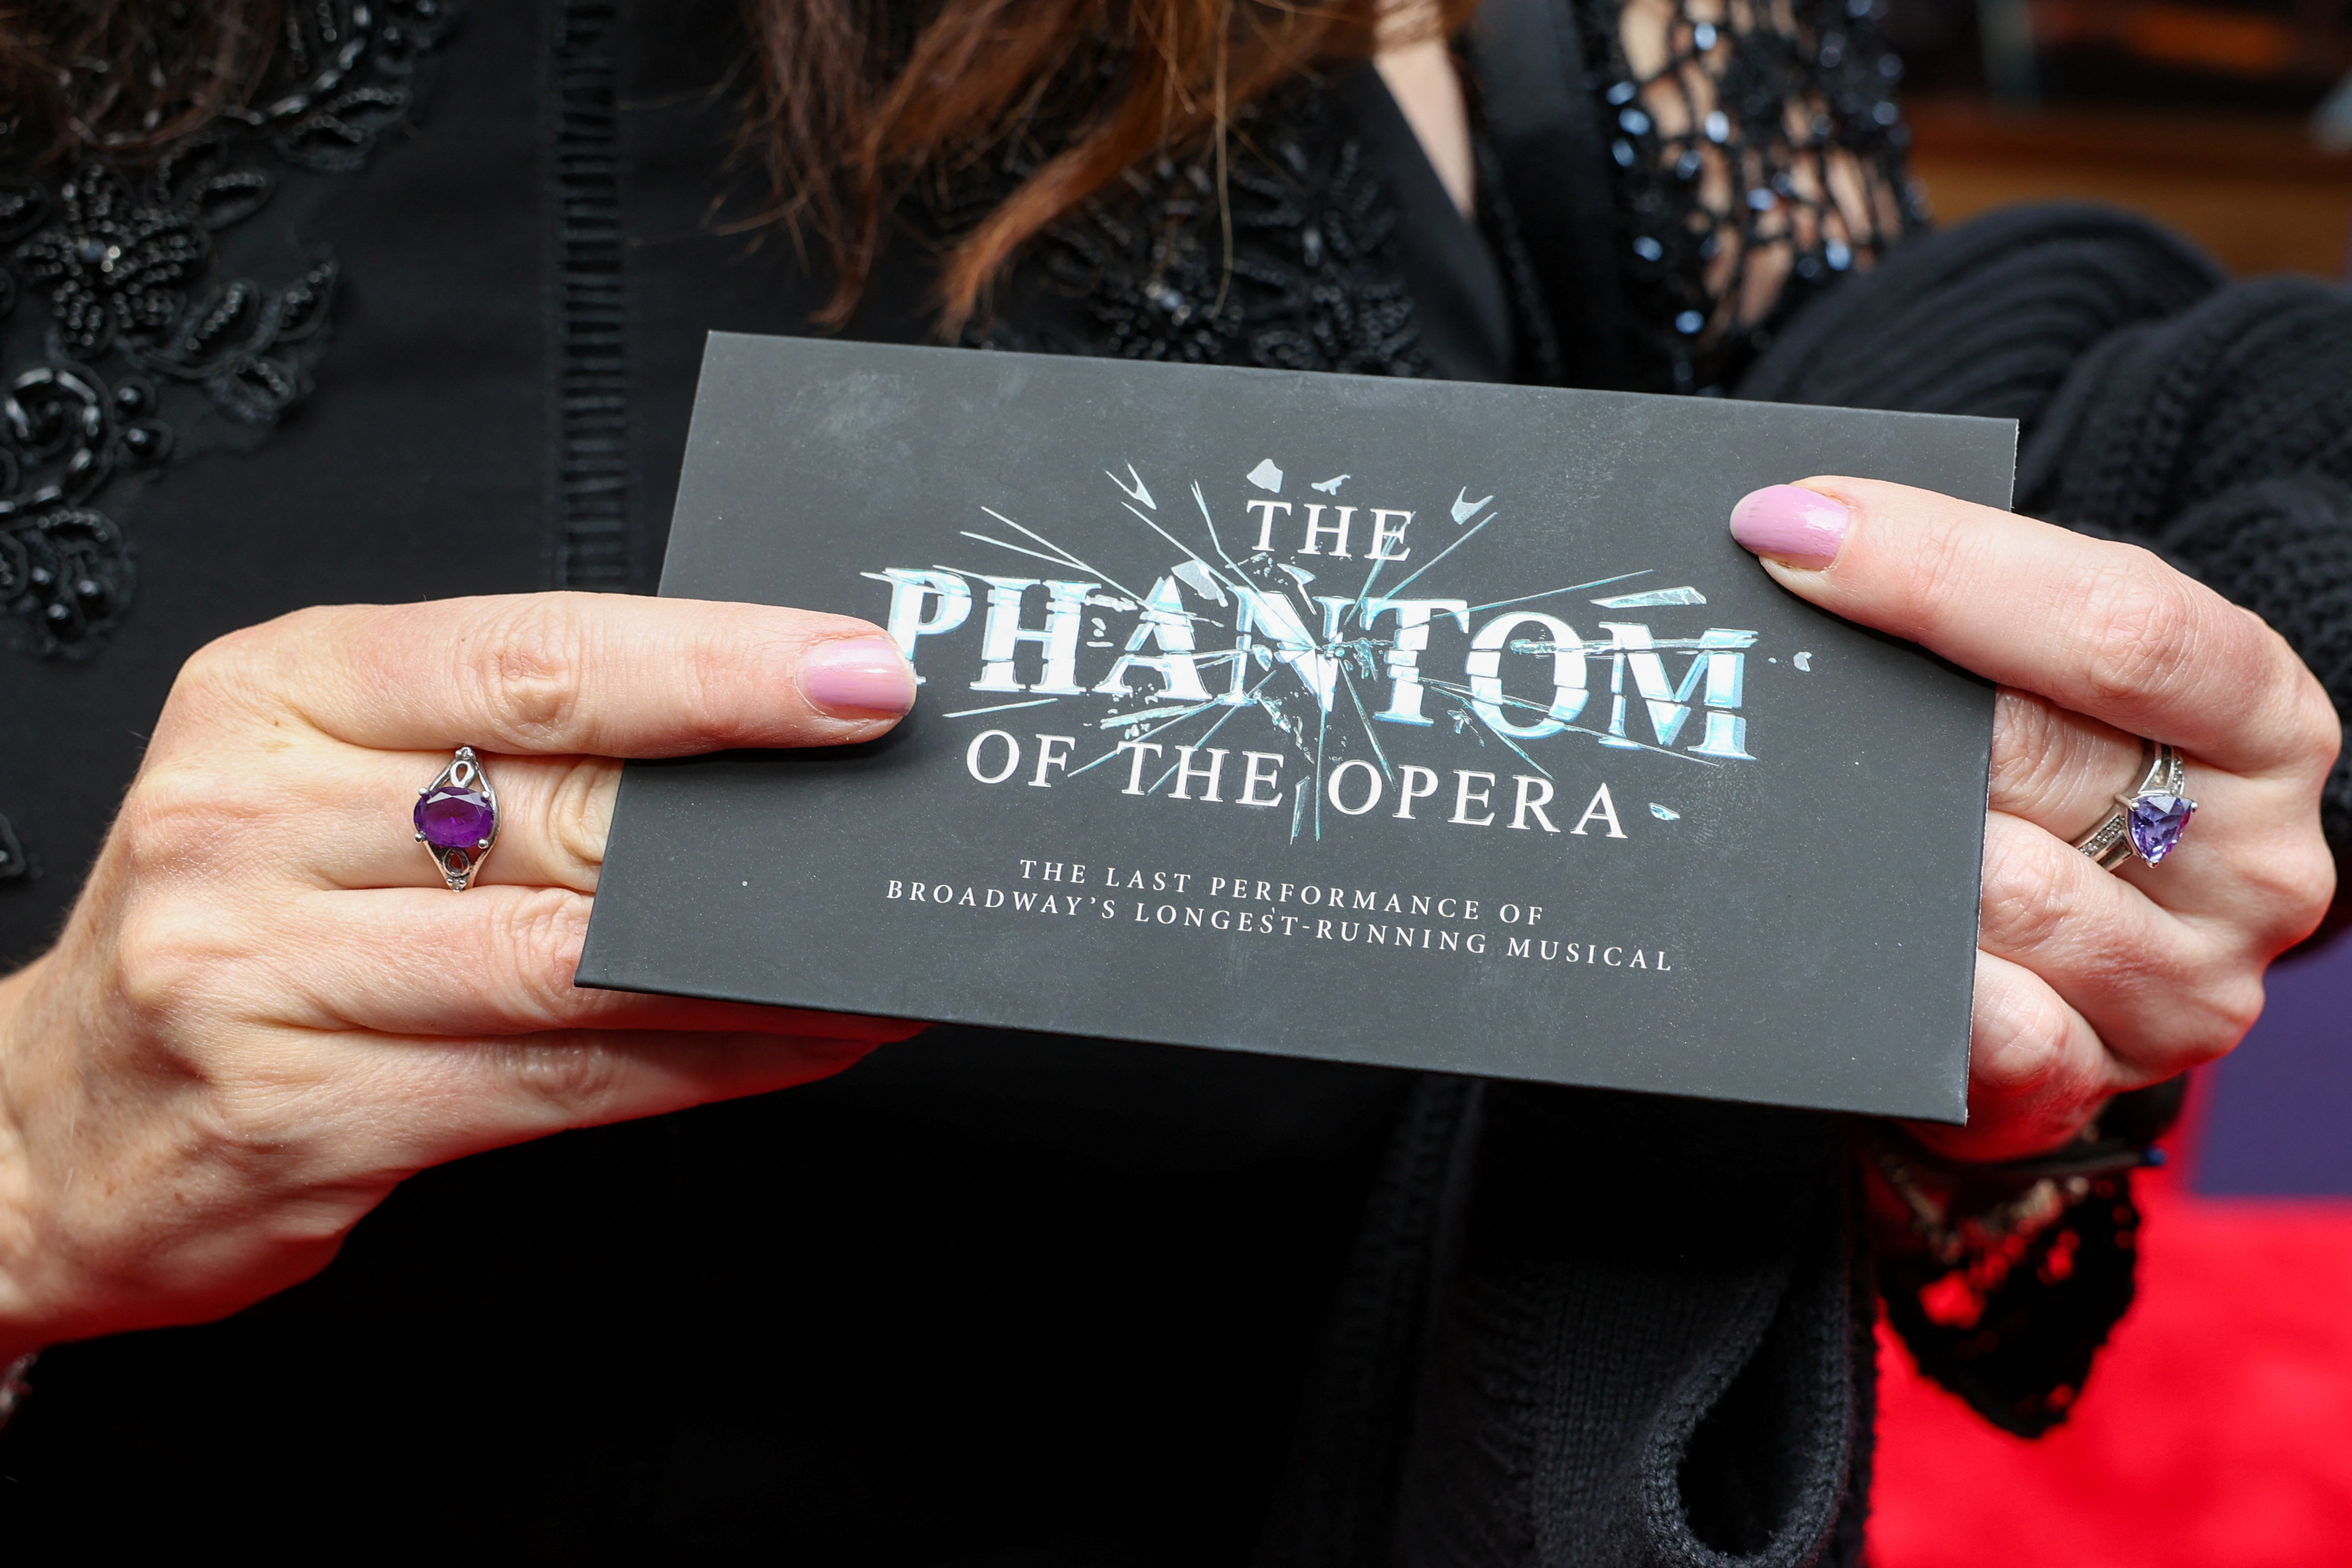 The ticket for the last performance of "The Phantom of the Opera".  (PHOTO: REUTERS/Caitlin Ochs)